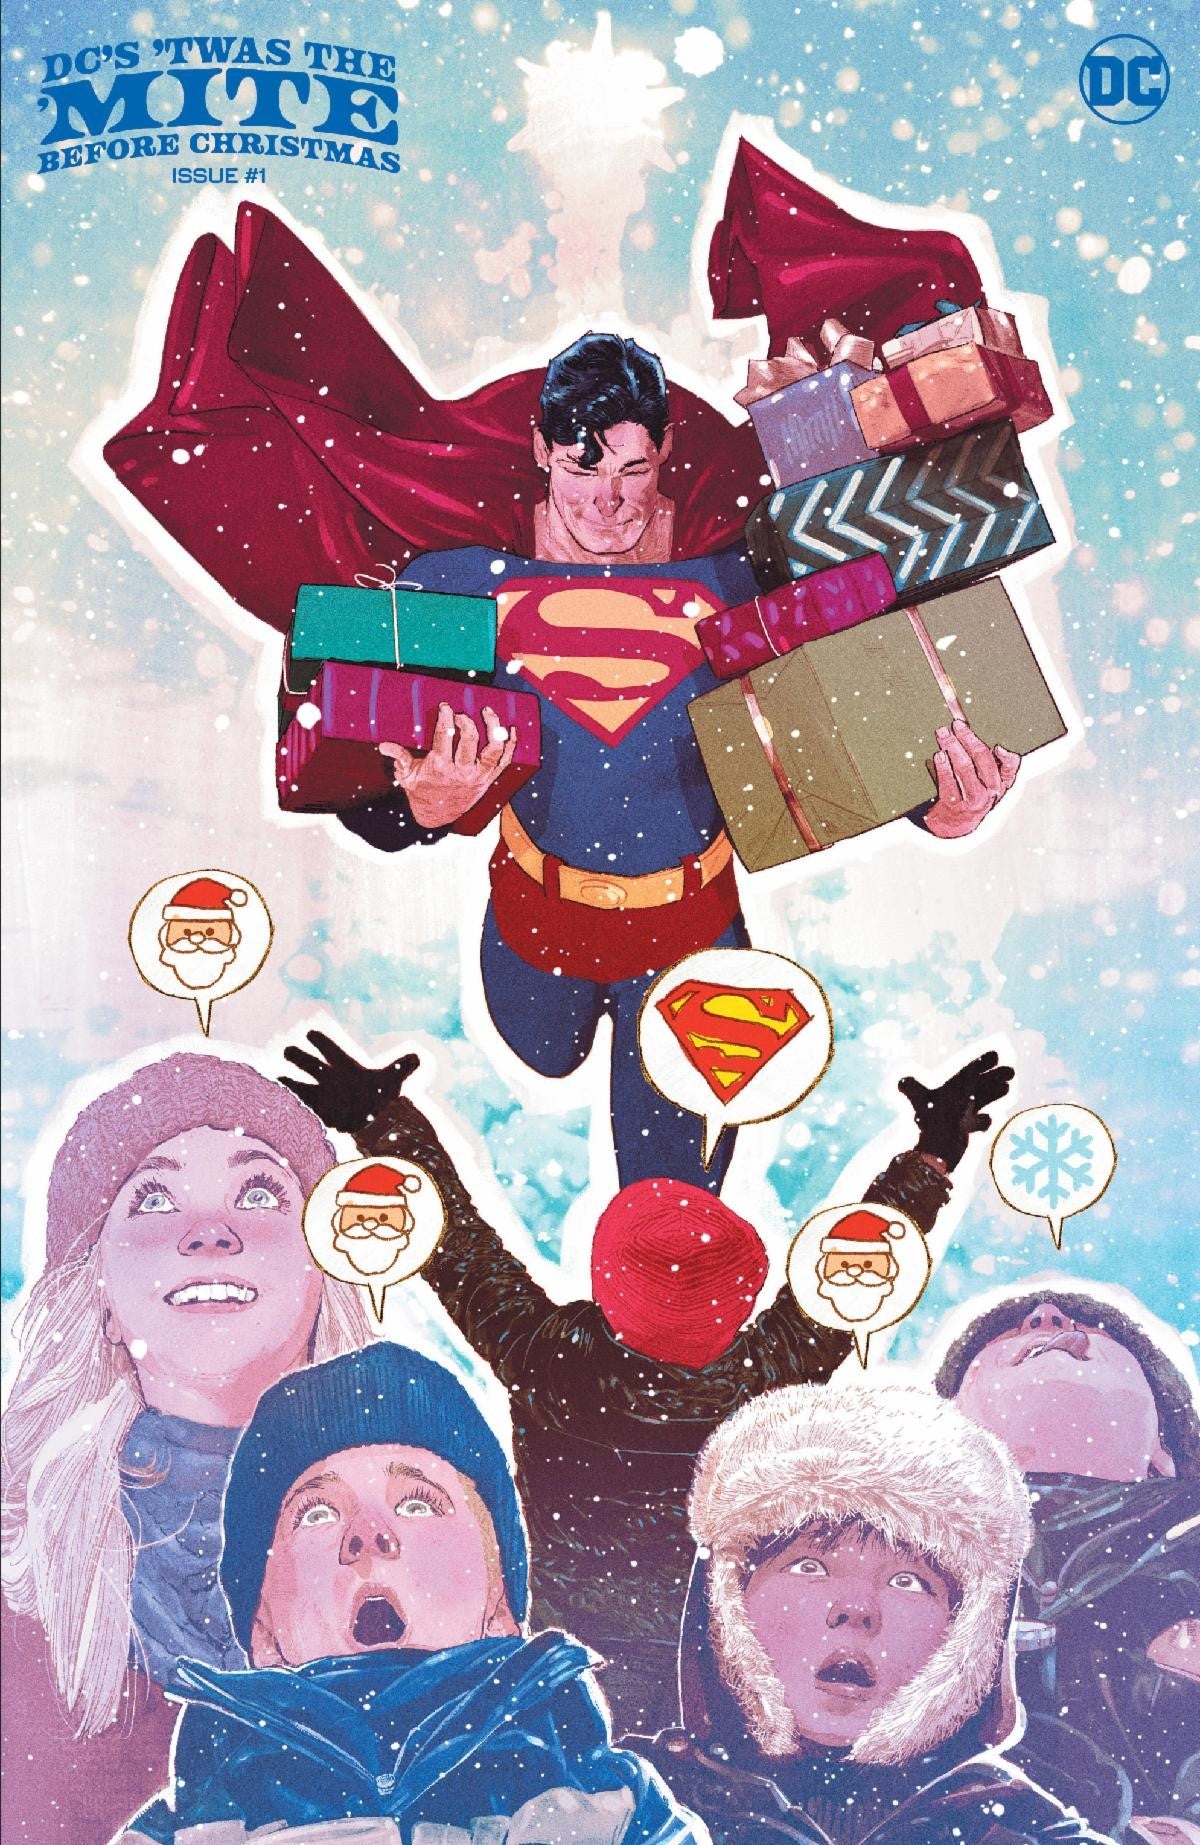 DC'S 'TWAS THE 'MITE BEFORE CHRISTMAS #1